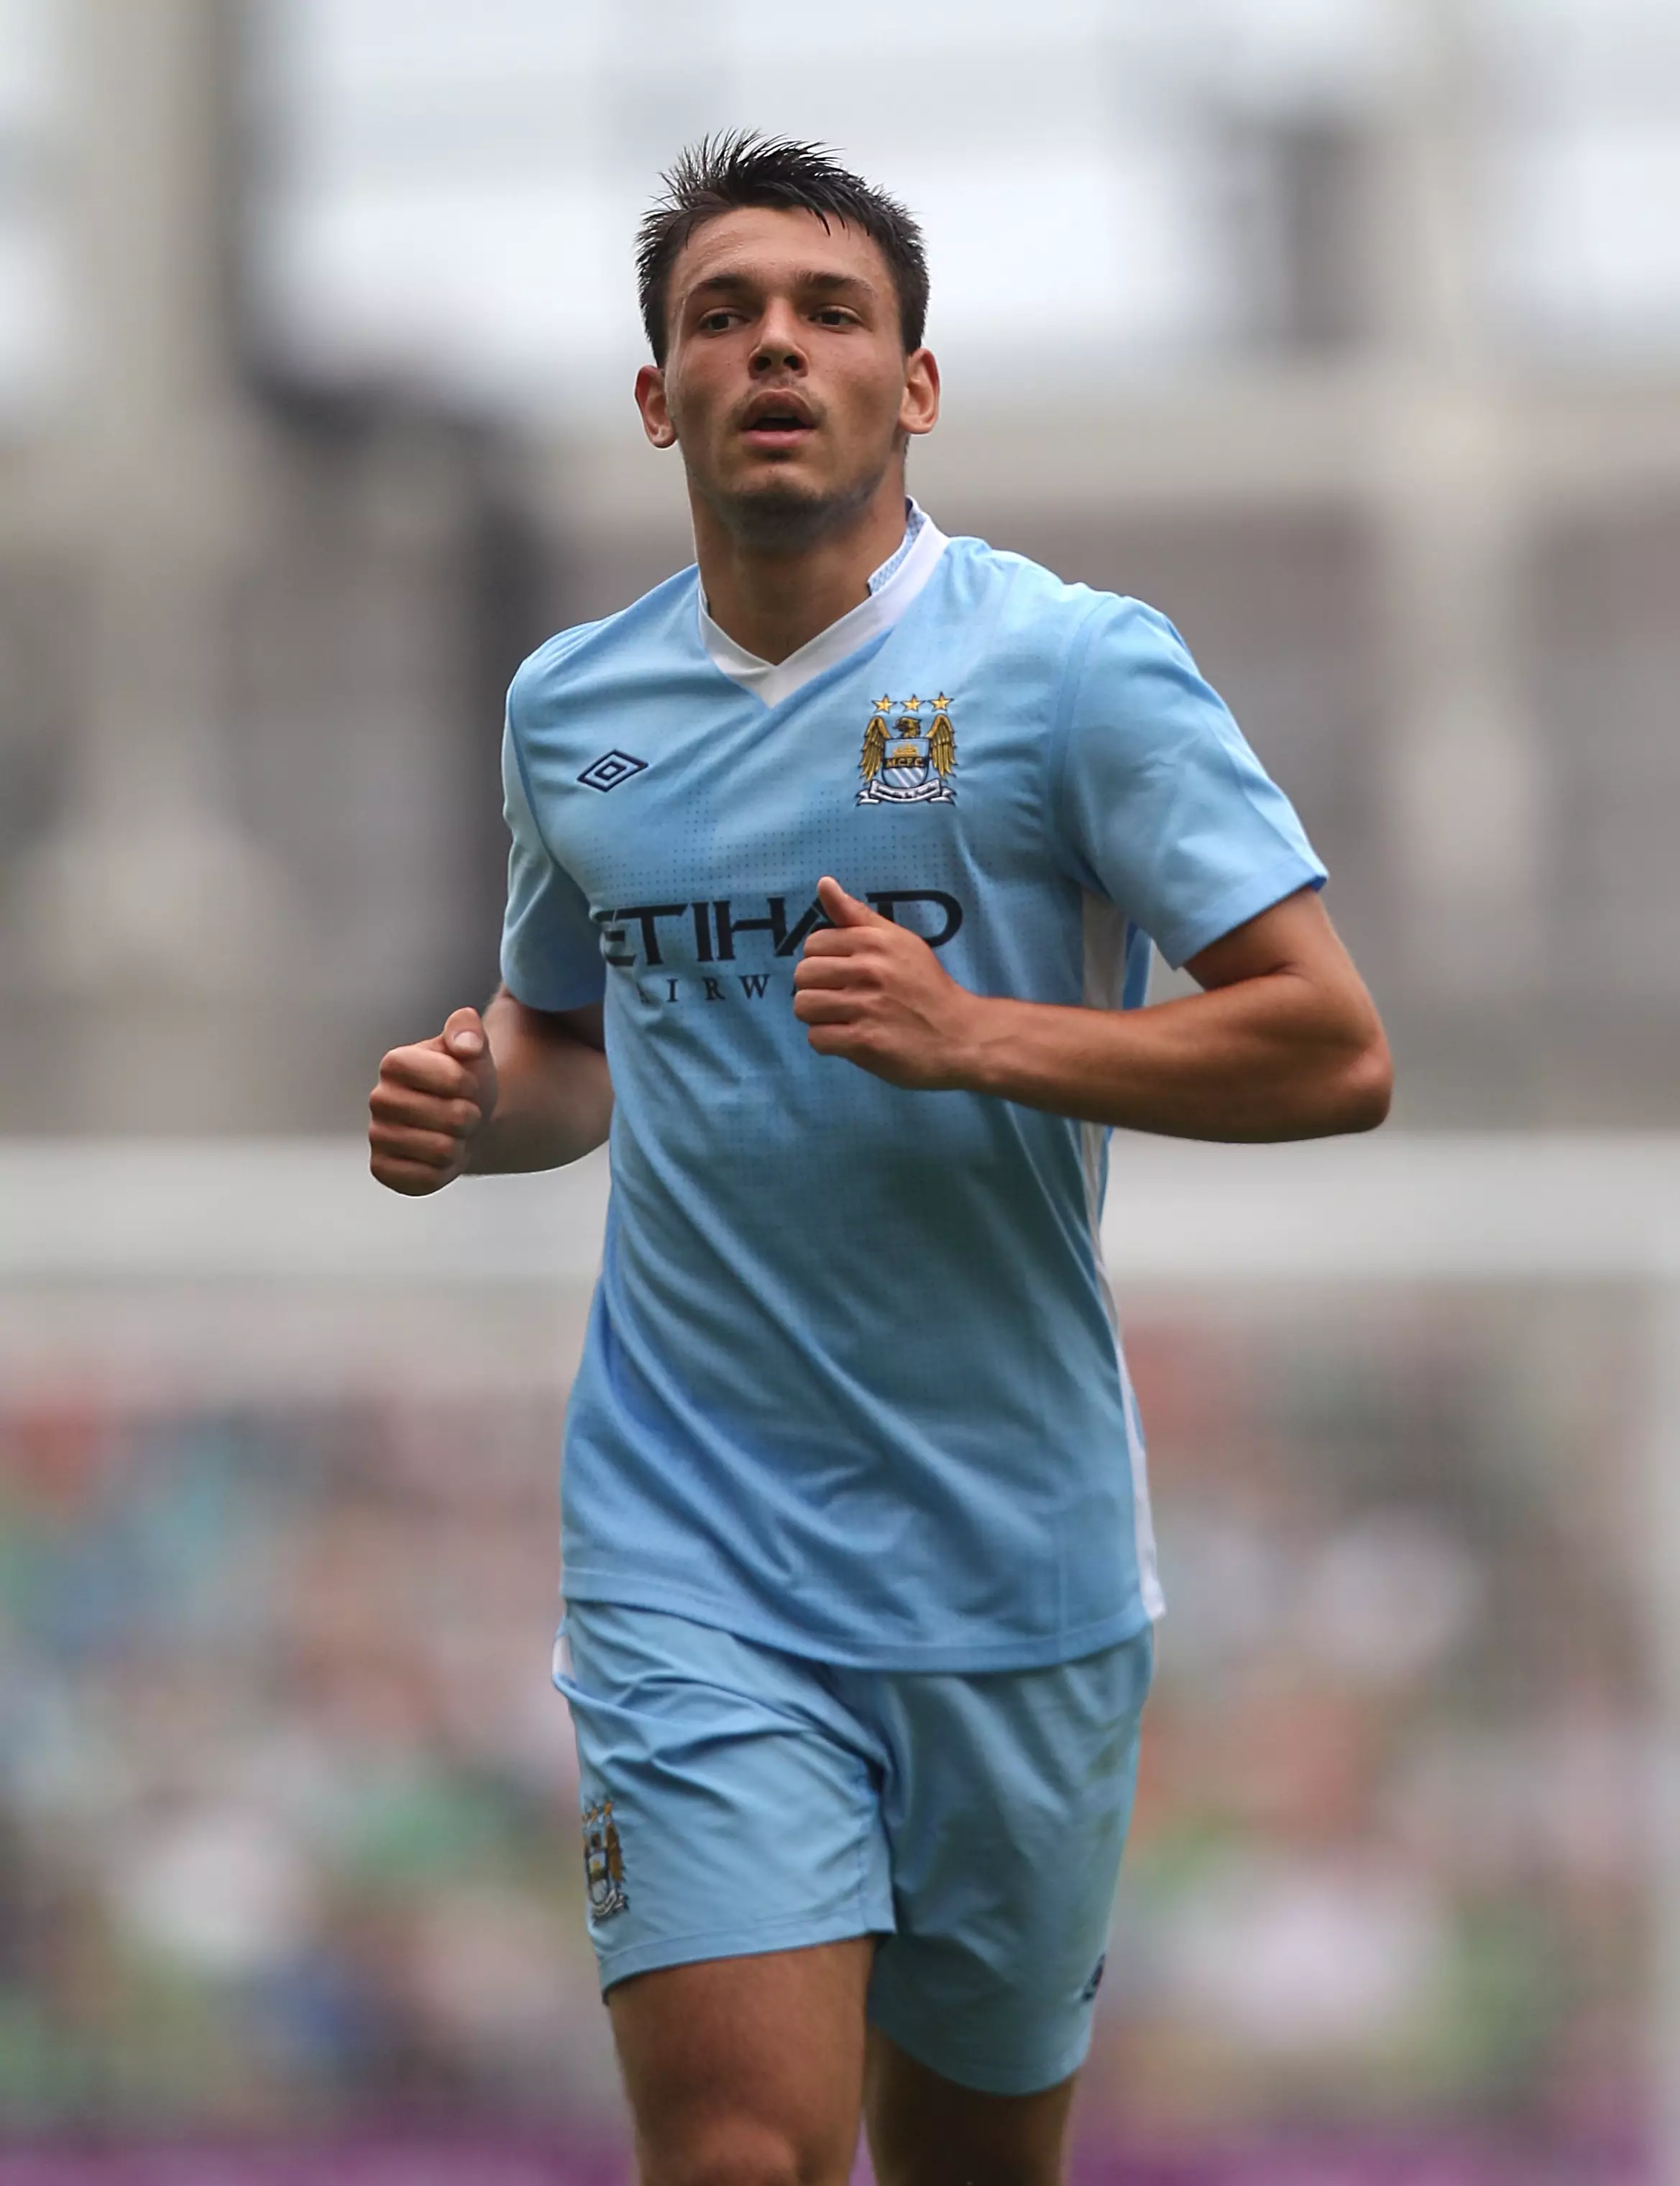 Veseli featured for Manchester City's youth teams before making the move to Manchester United in January, 2012. Image: PA